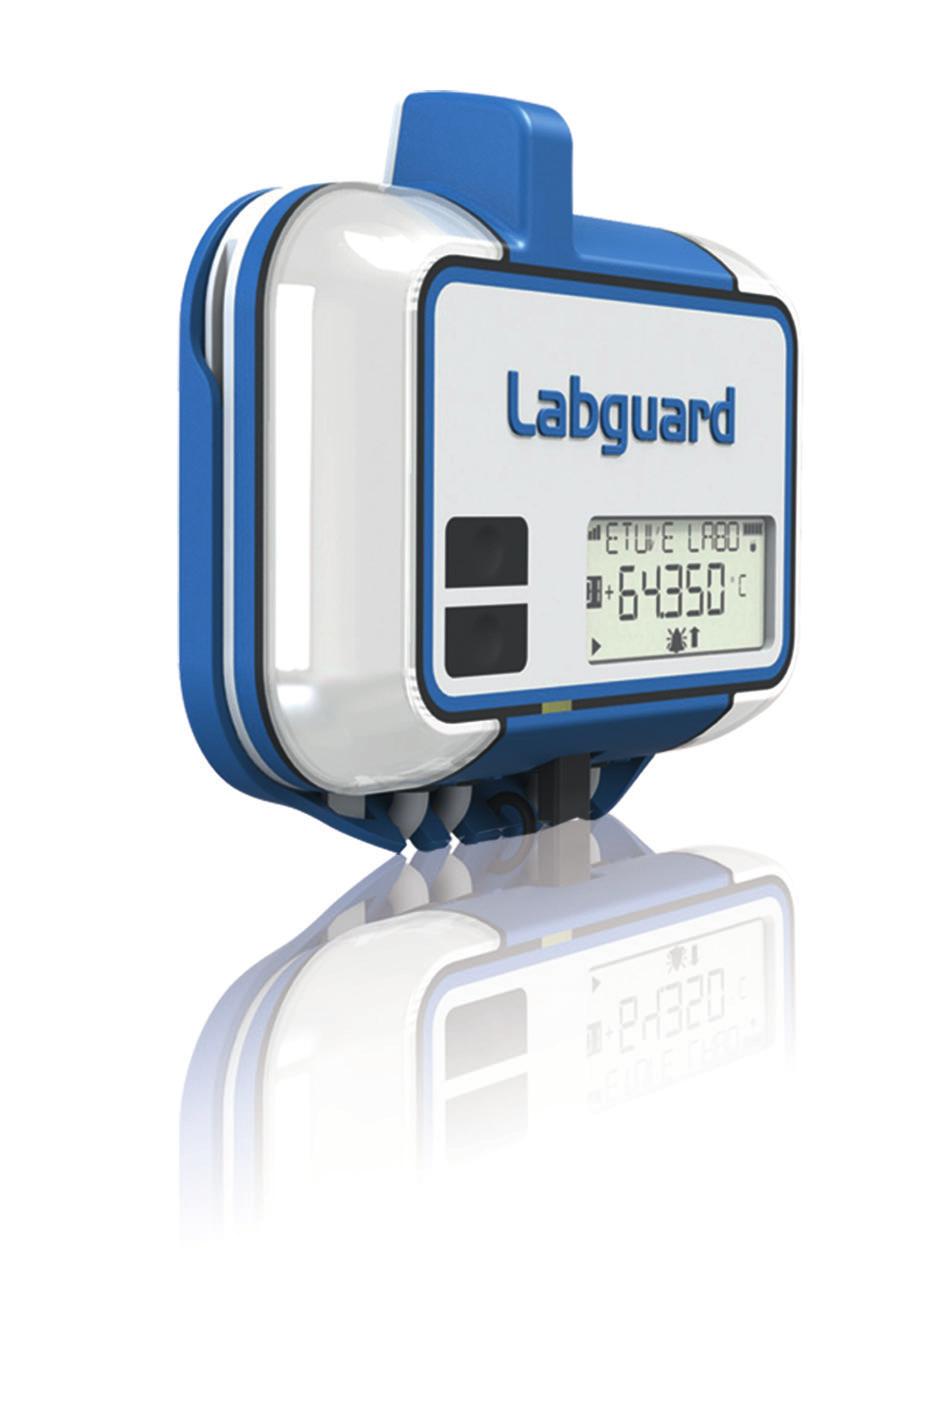 Certified Quality and Savings Labguard 3D helps you develop and maintain your quality standards.